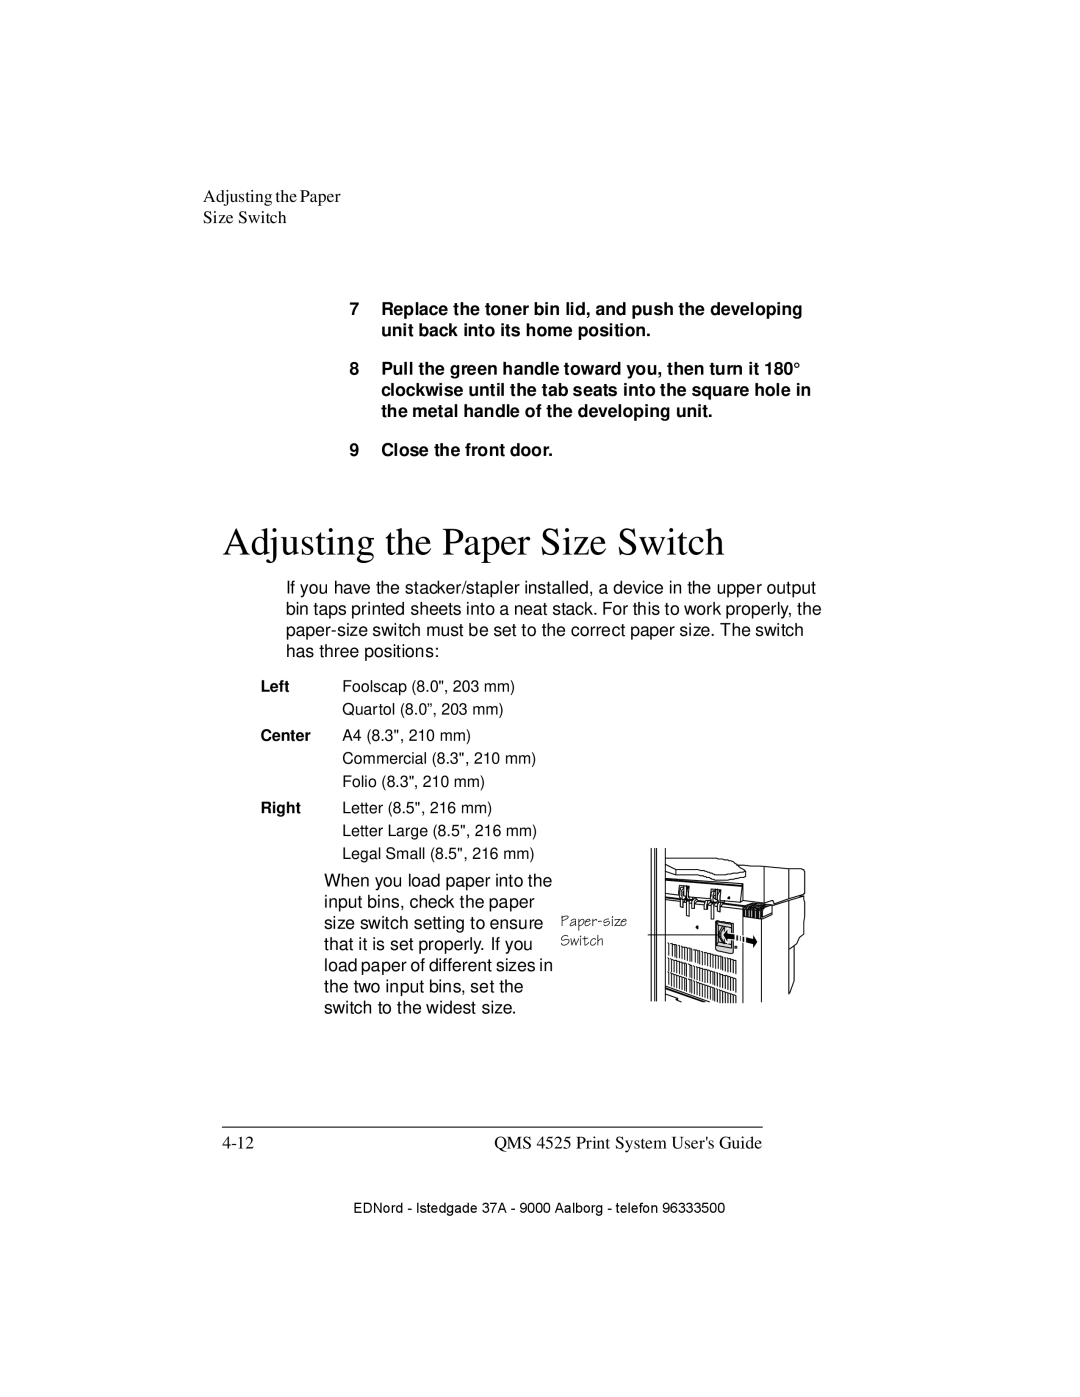 IBM QMS 4525 manual Adjusting the Paper Size Switch 